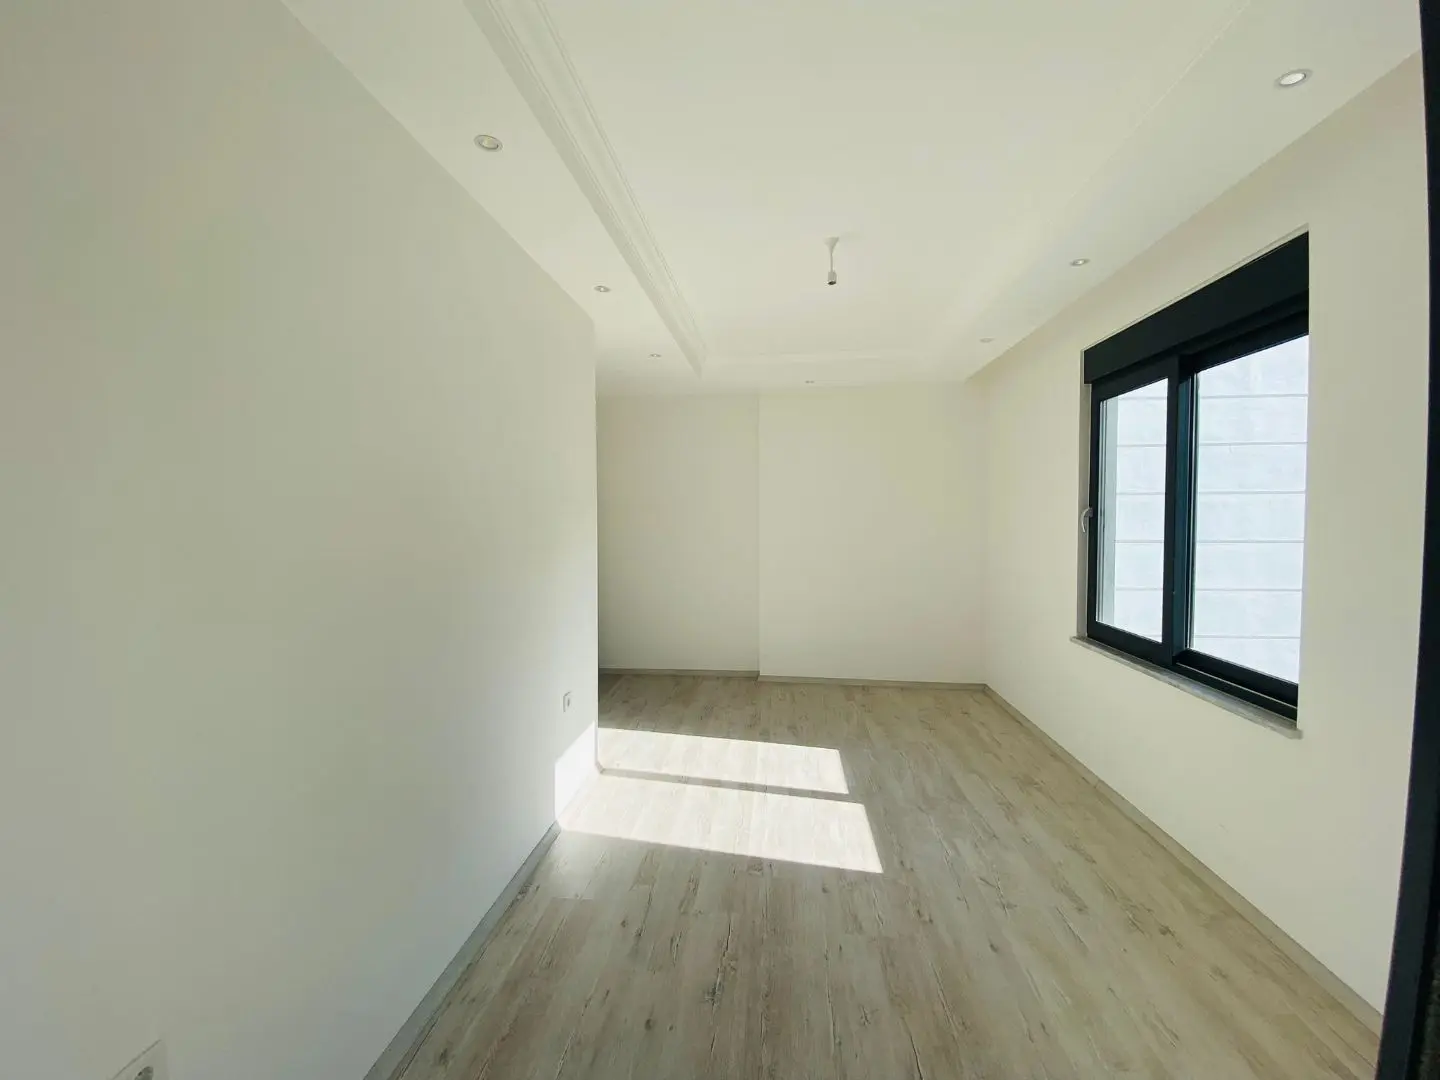 NEW SPACIOUS 2+1 FLAT IN THE CENTER OF ALANYA